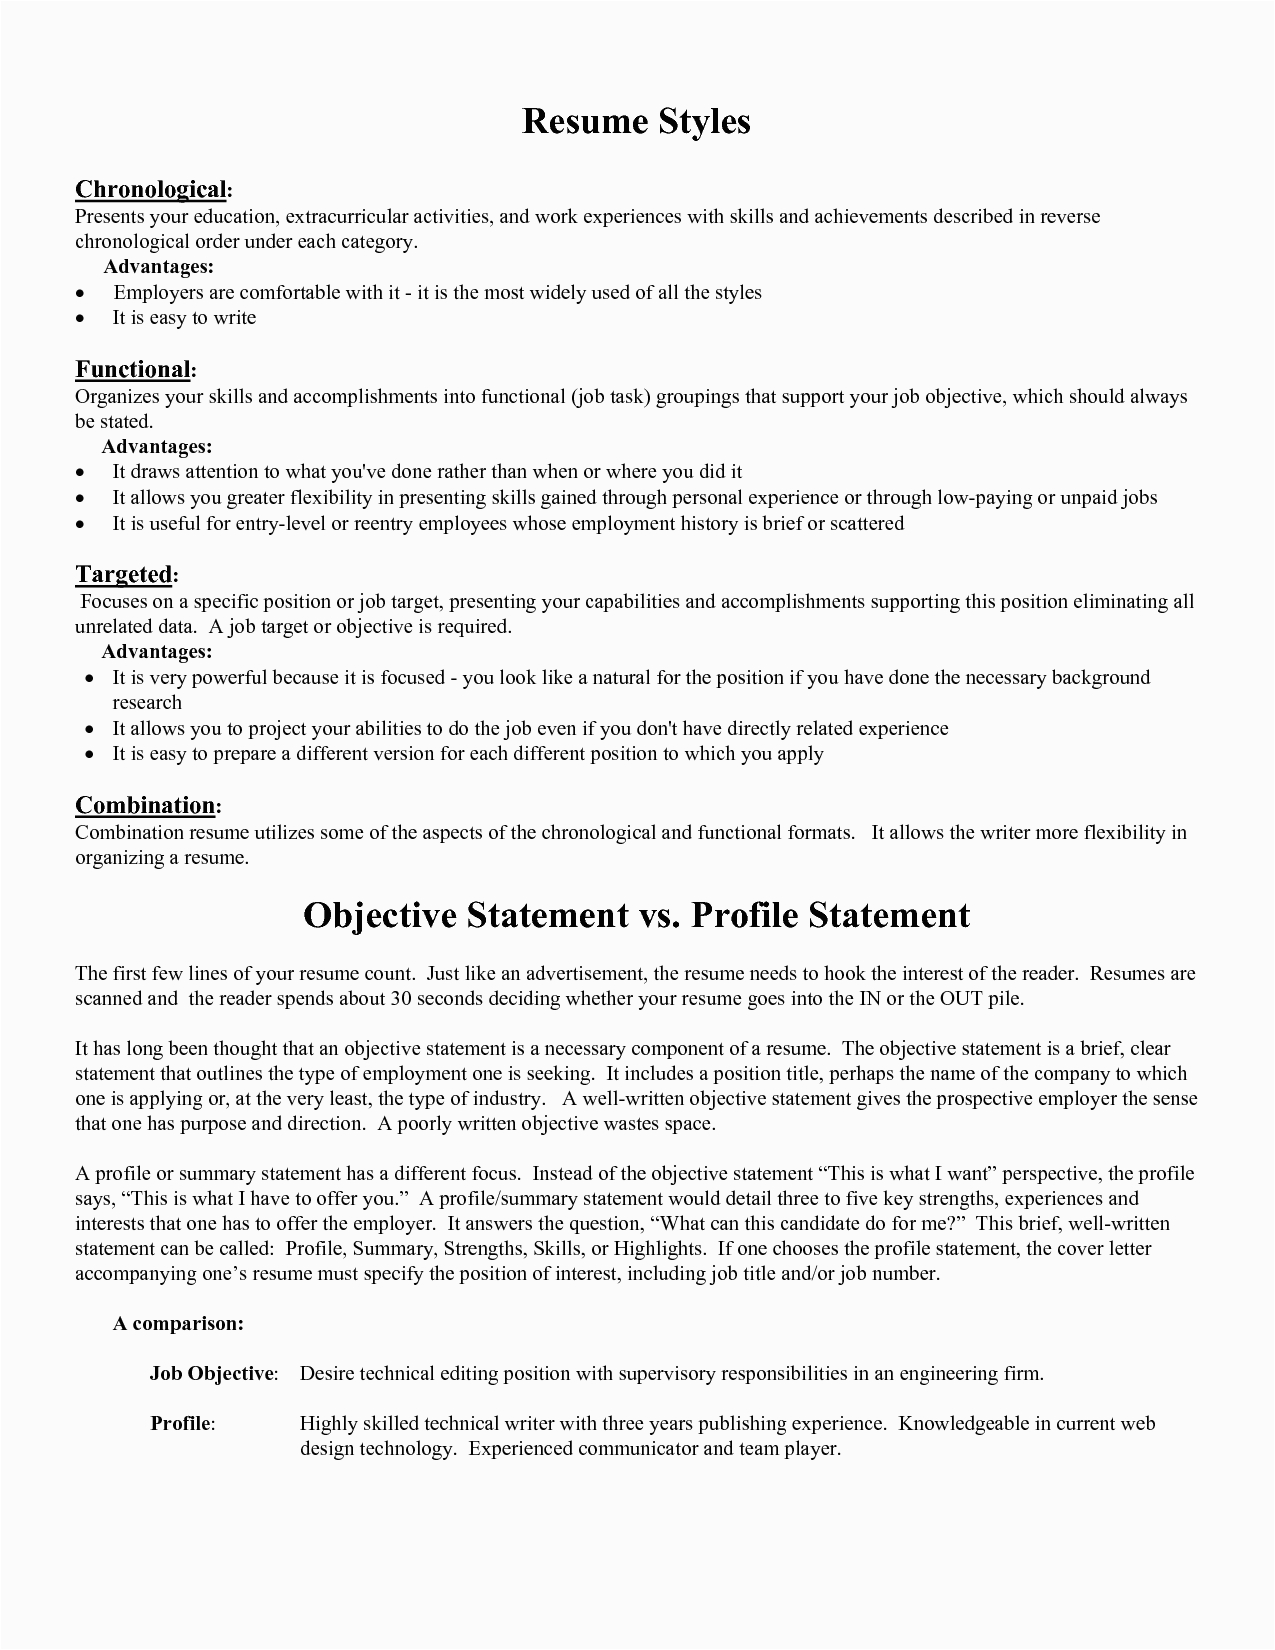 Sample Objective Statements for General Resumes Resume Objective Statement